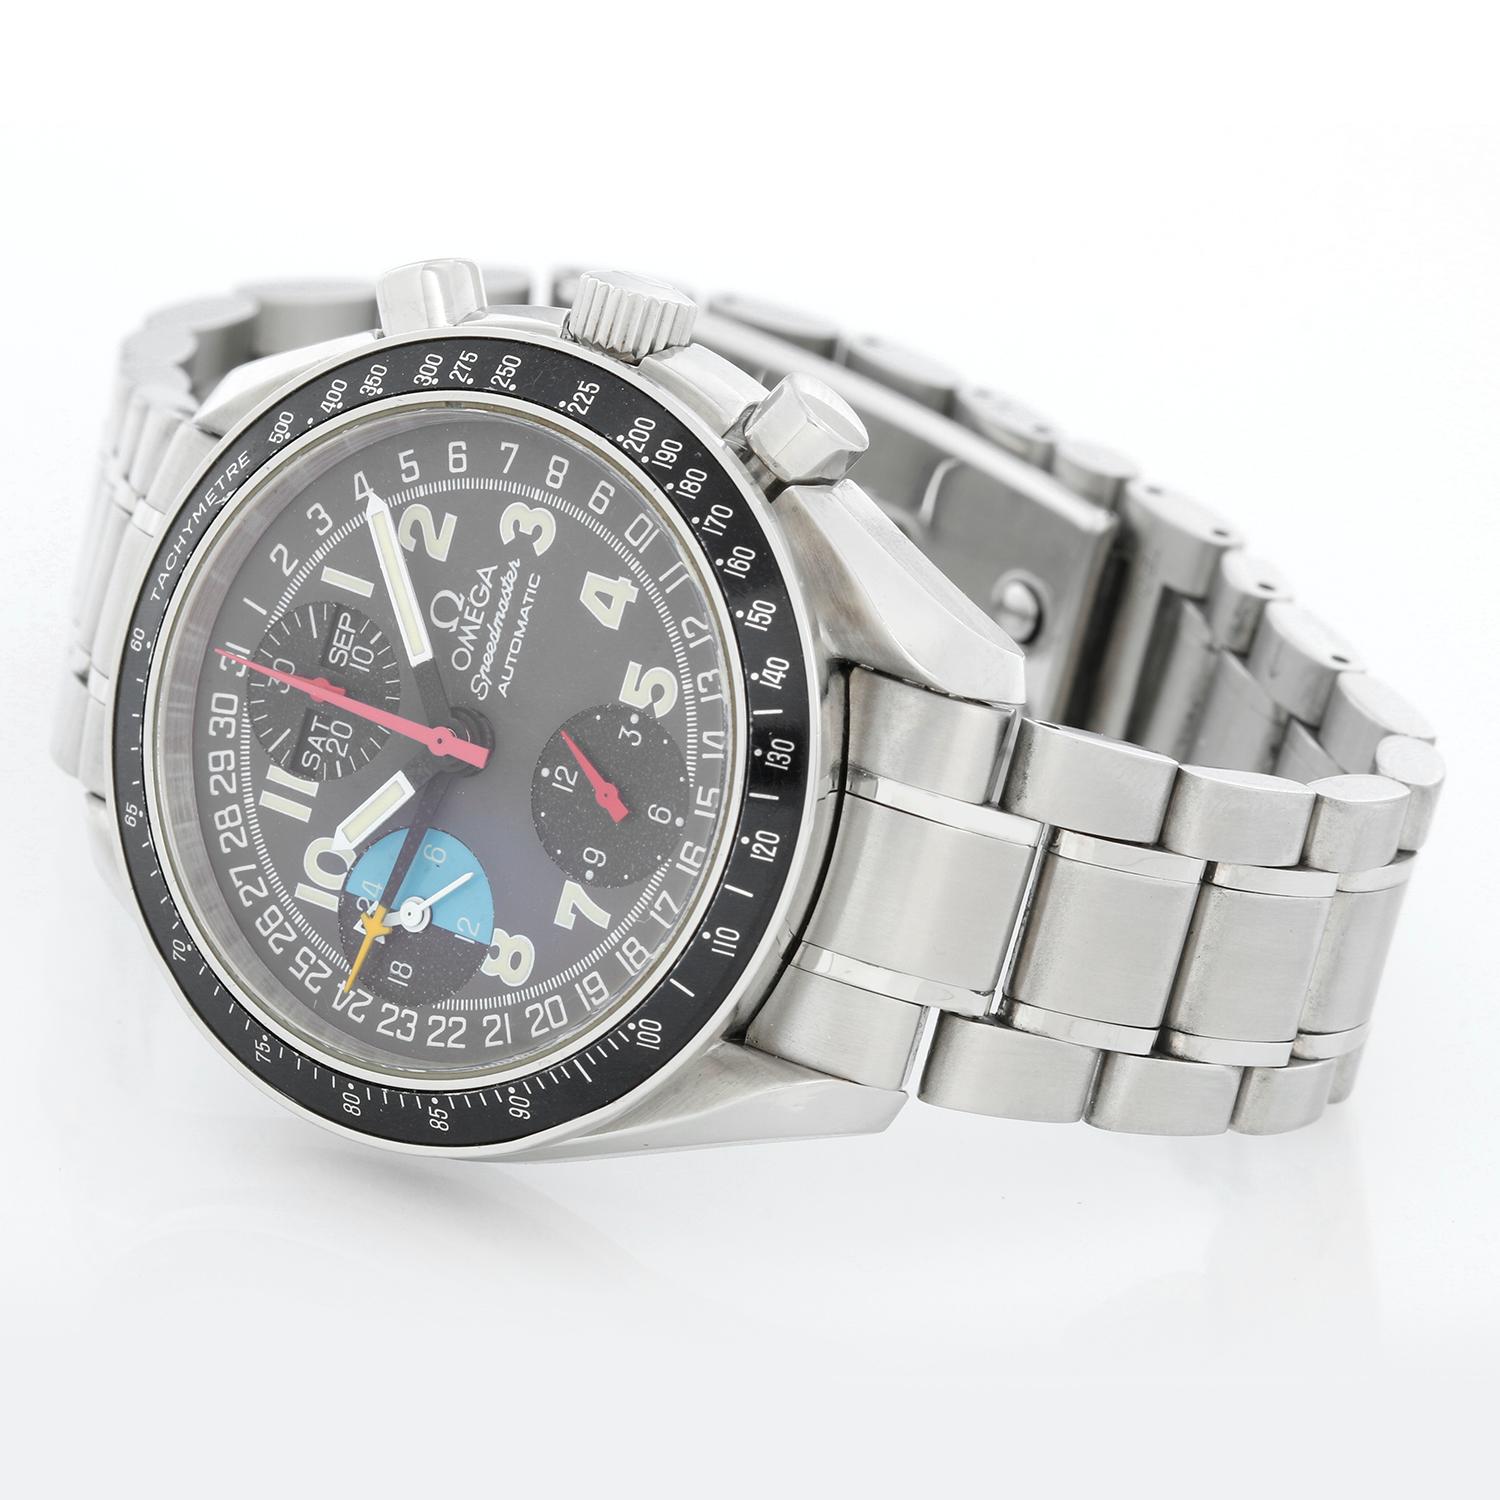 Omega Speedmaster MK40 Triple Date Chronograph  - Manual winding; chronograph. Stainless steel case, bezel and crown  (40mm diameter). Gray dial; triple date, minutes and seconds recorders; day night indicator. Stainless steel braclet with deployant